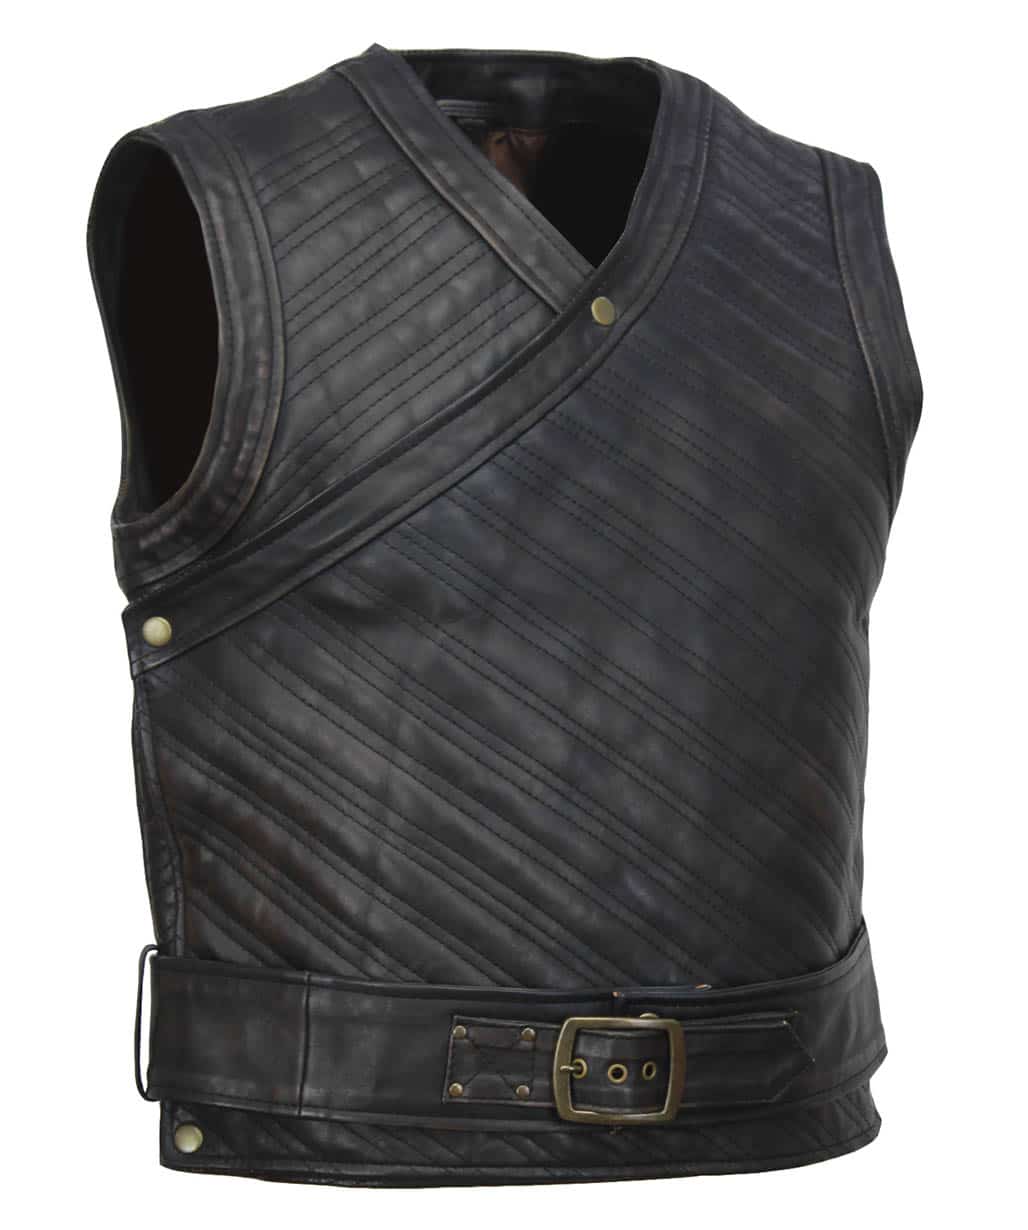 seven-kings-must-die-uhtred-ragnarson-leather-vest-outfit-costume